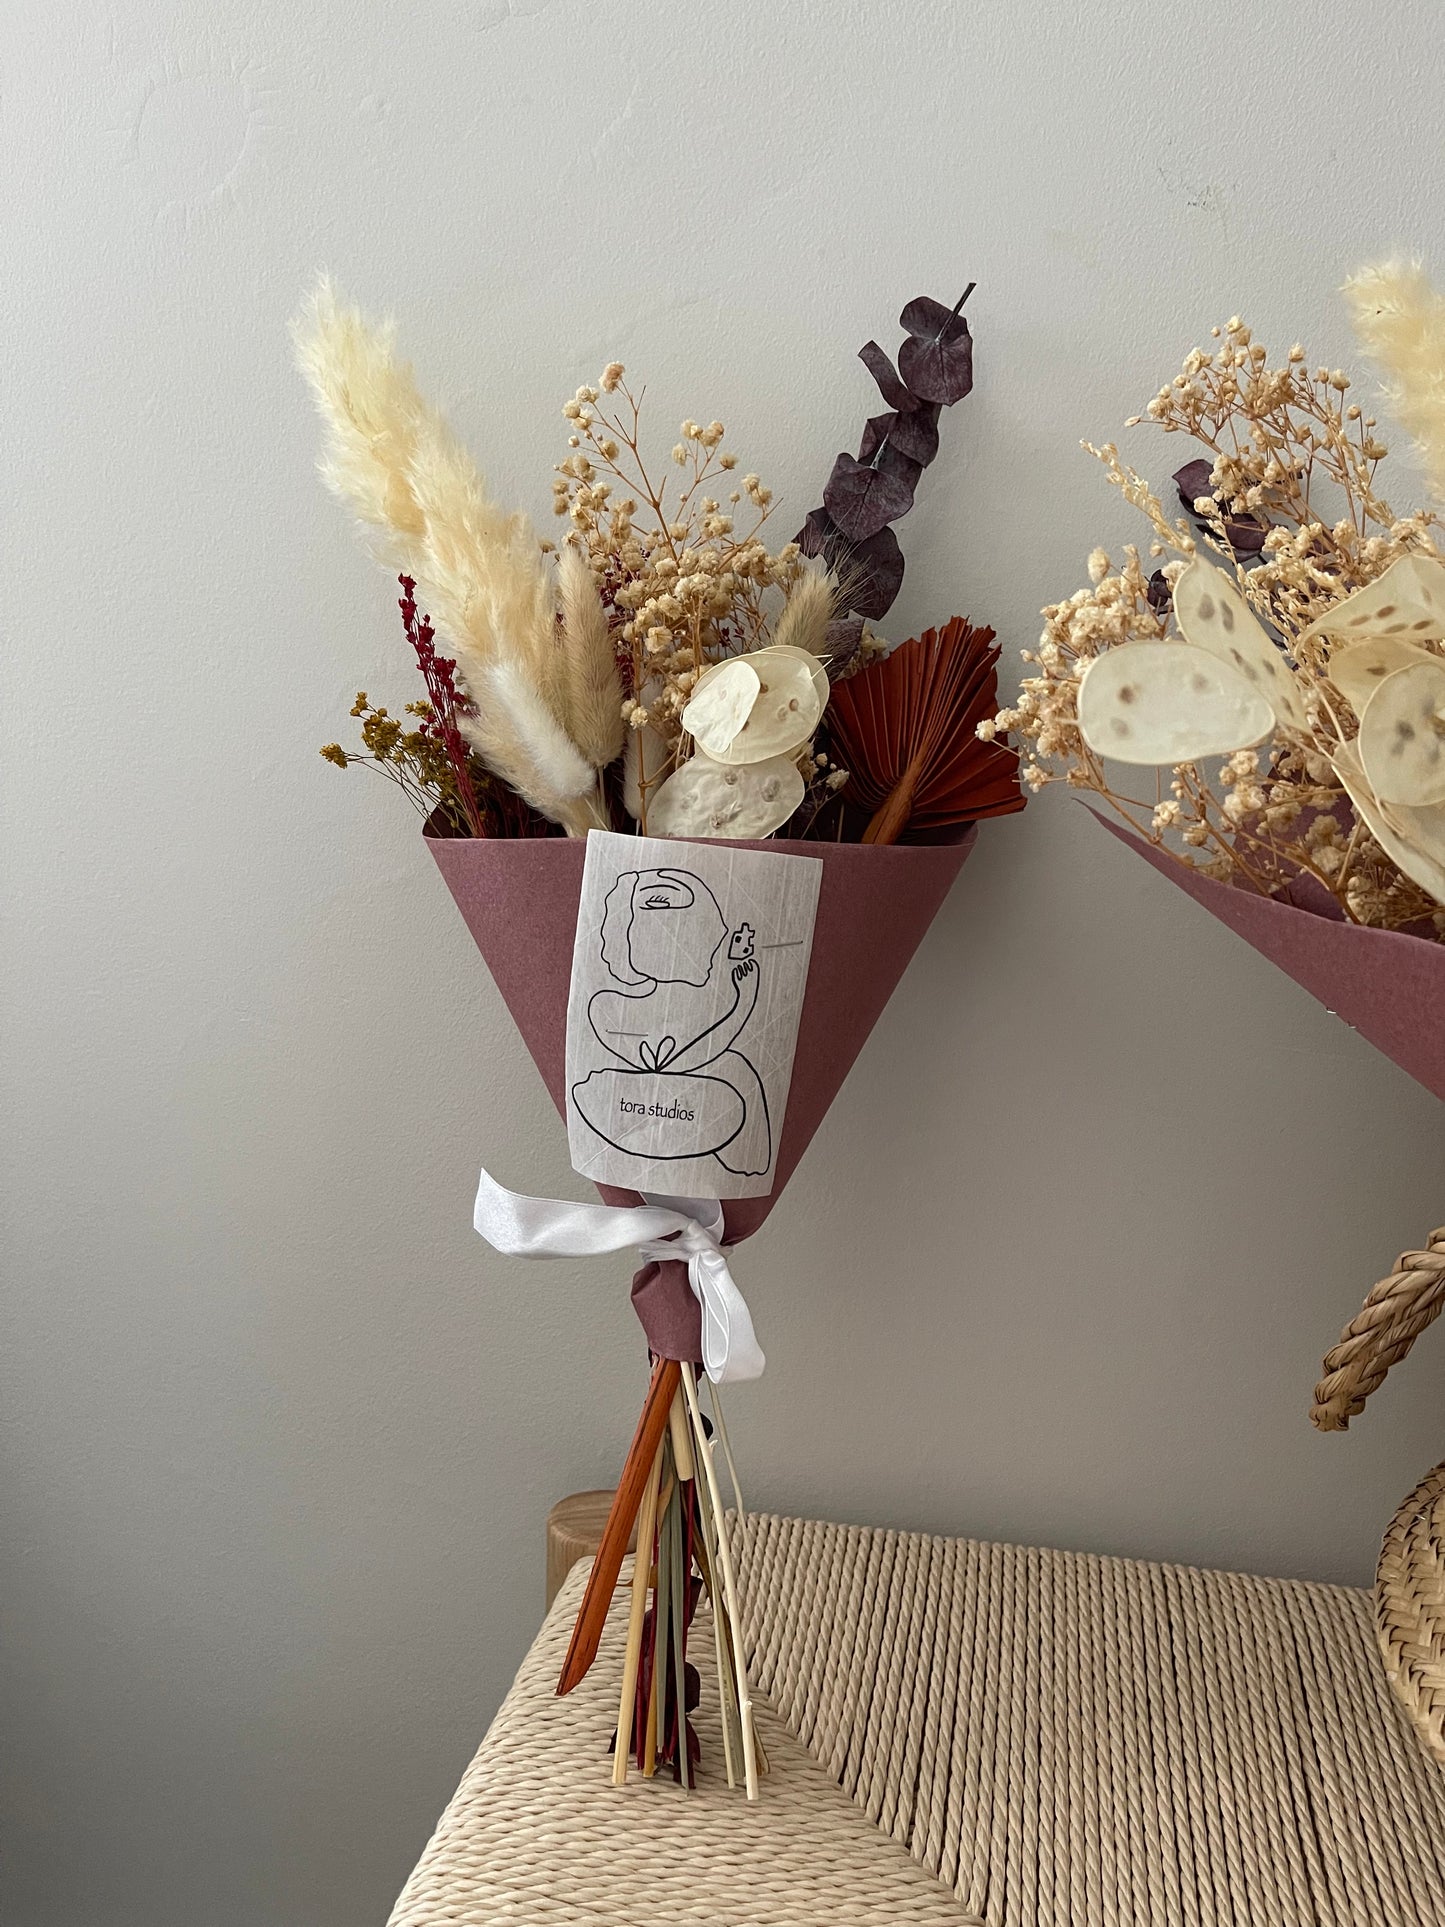 Small Dried Bouquet